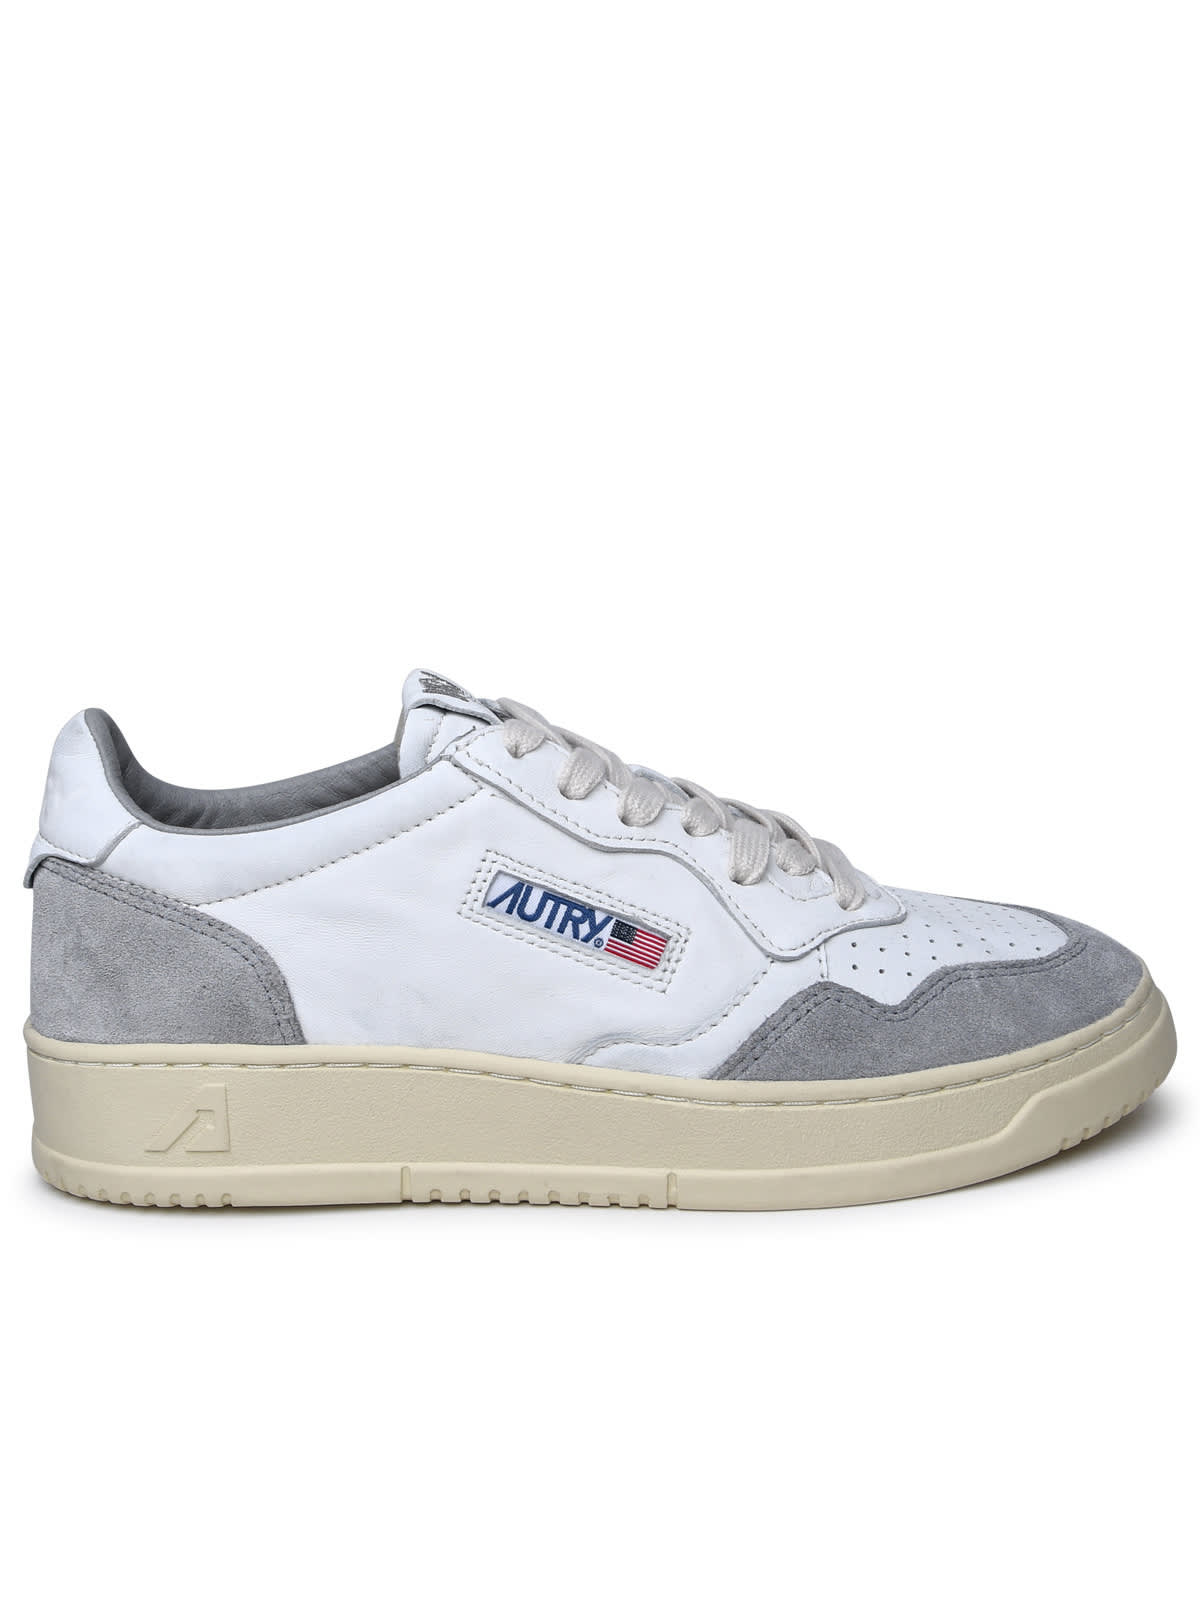 AUTRY TWO-TONE LEATHER SNEAKERS